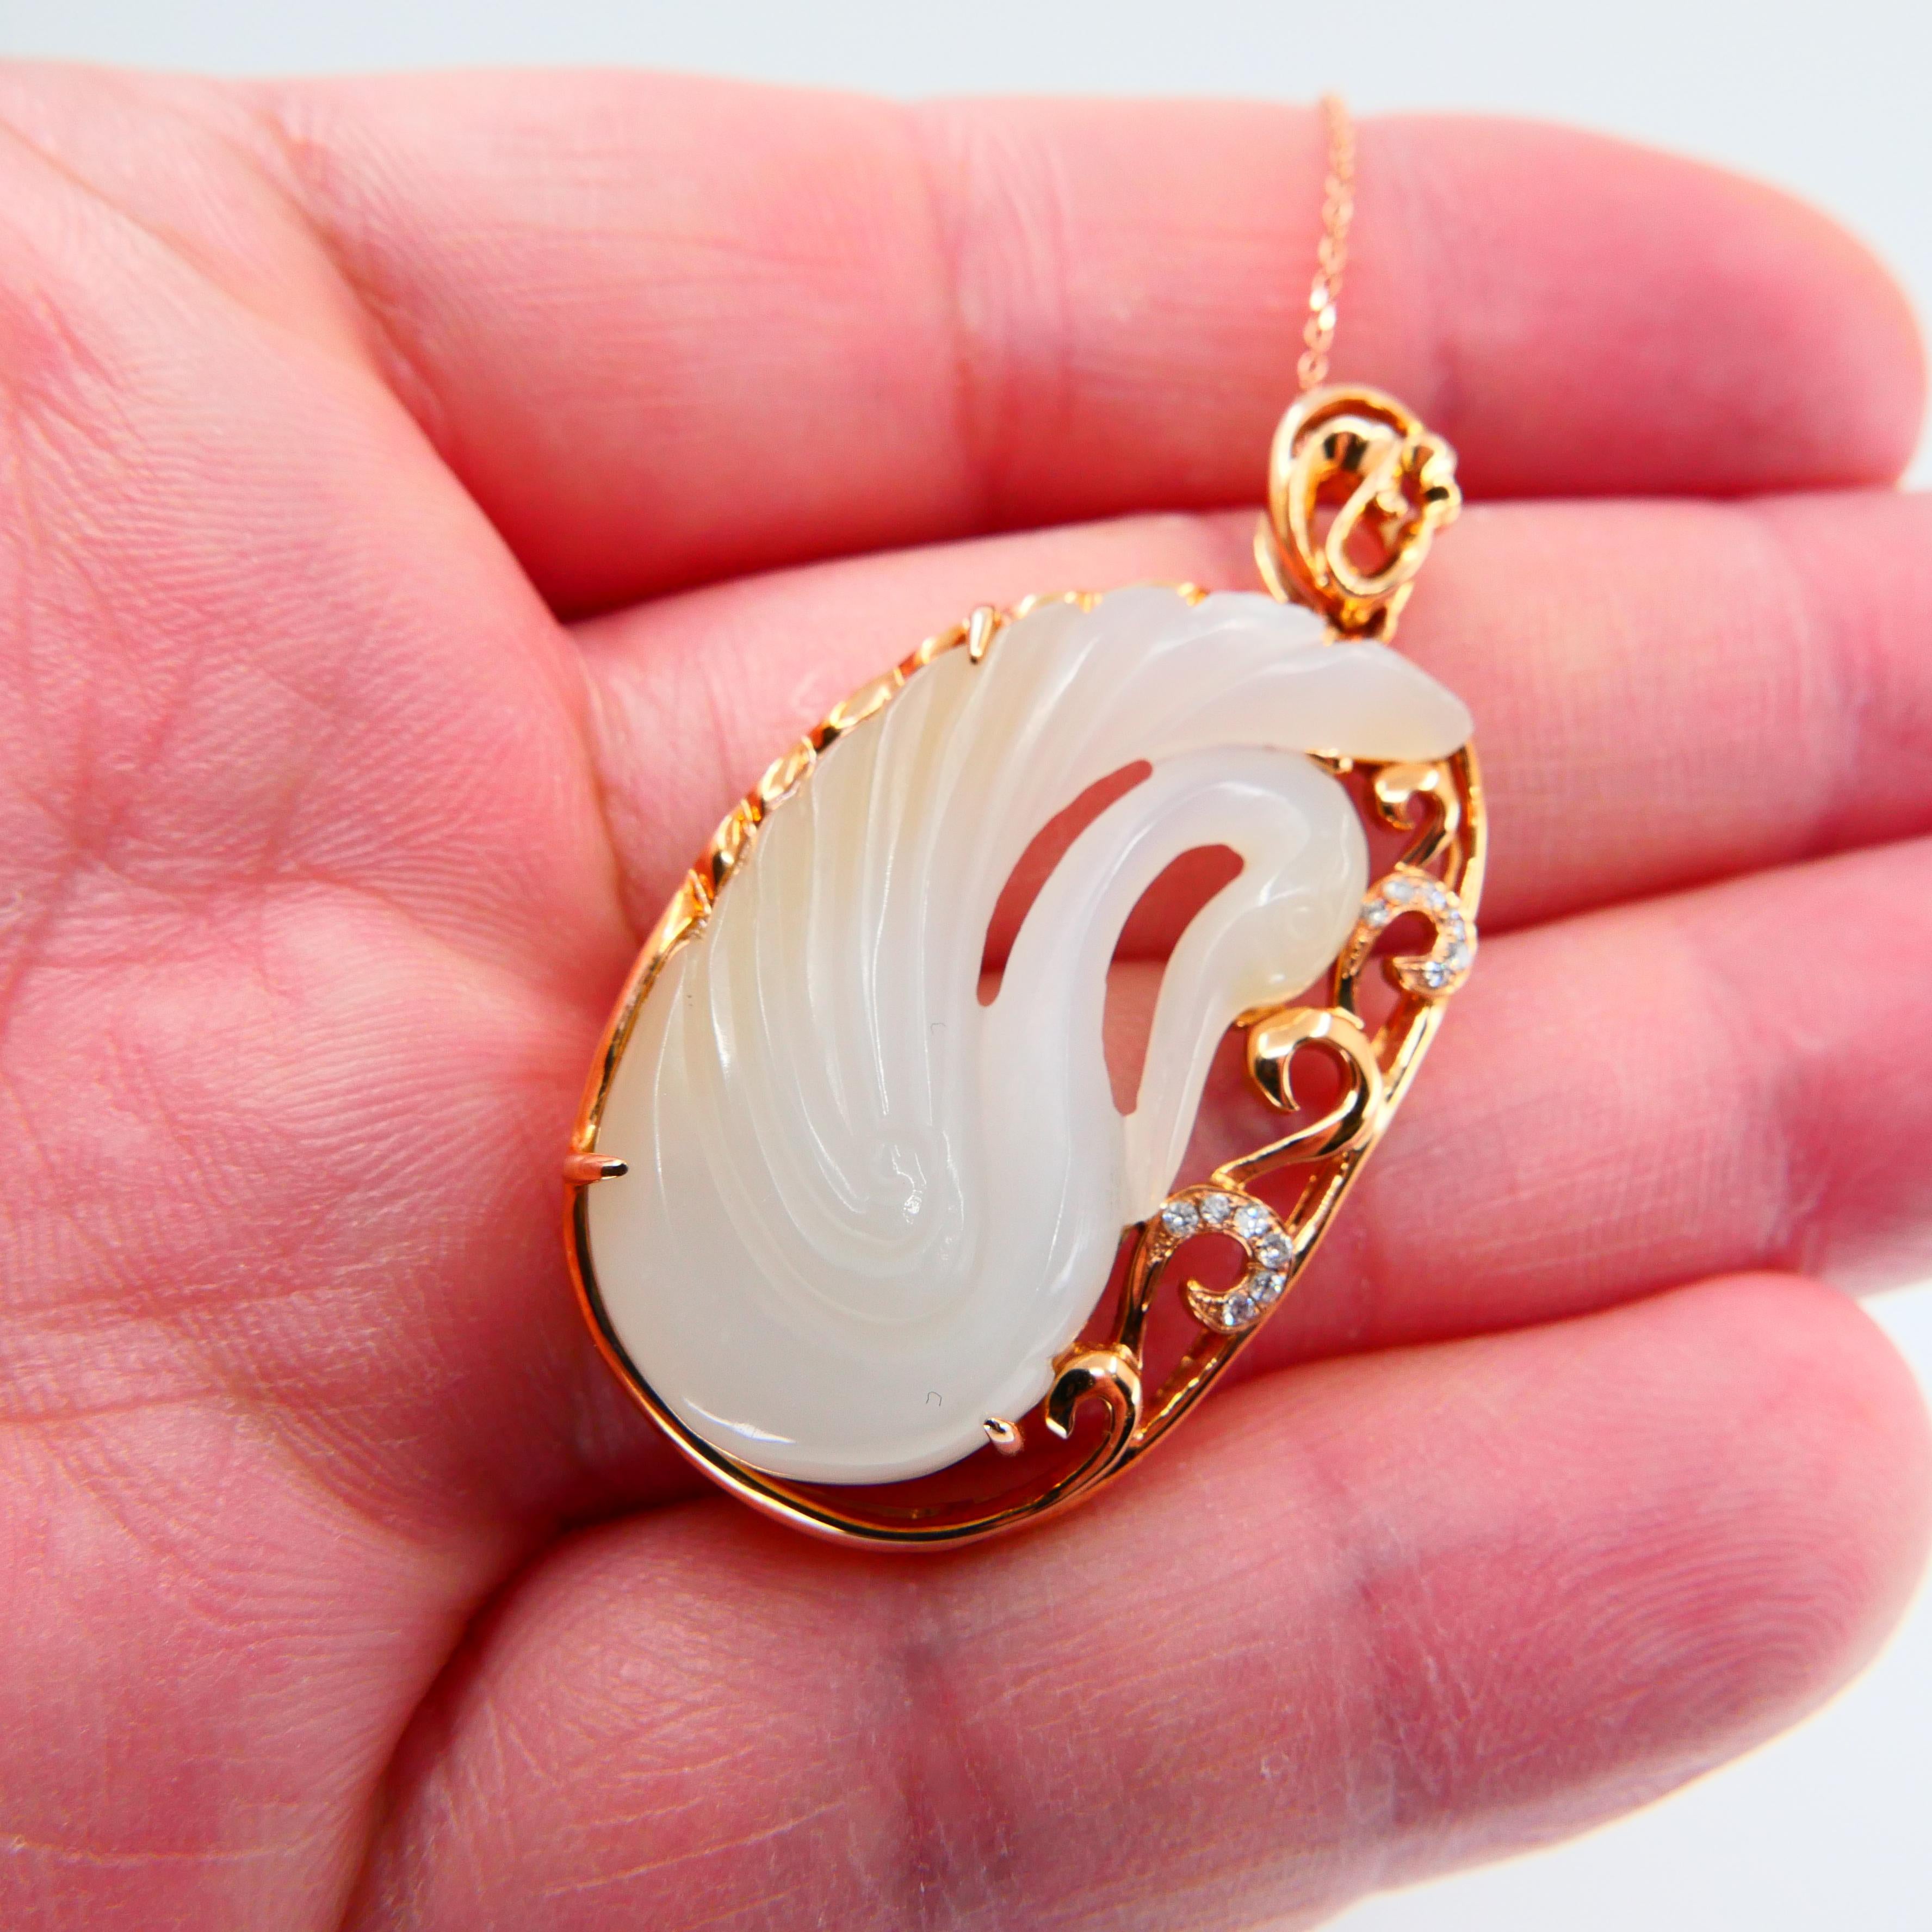 yigedan New Thousands of Golden Inlaid Natural Hetian White Jade Rose Pendant Necklace with Certificate 